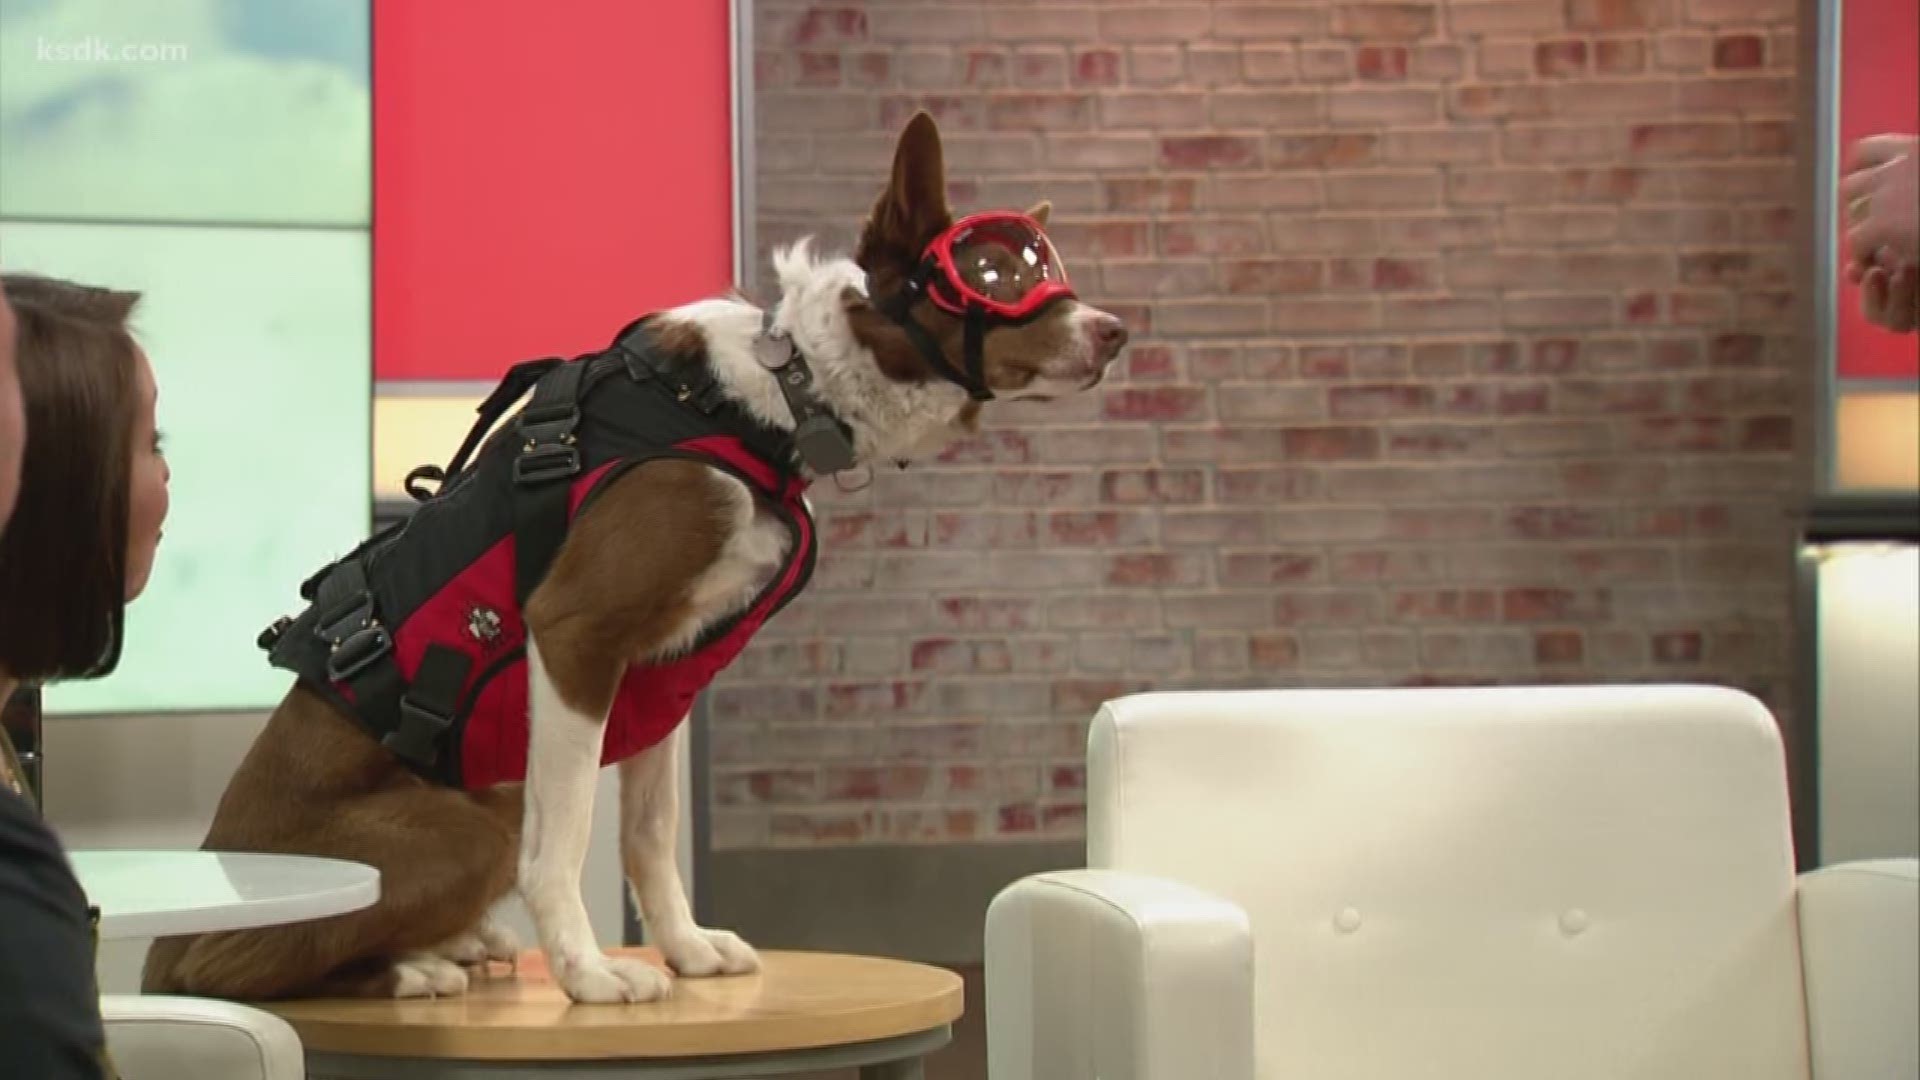 Superpower Dogs incorporates true stories of real heroes.